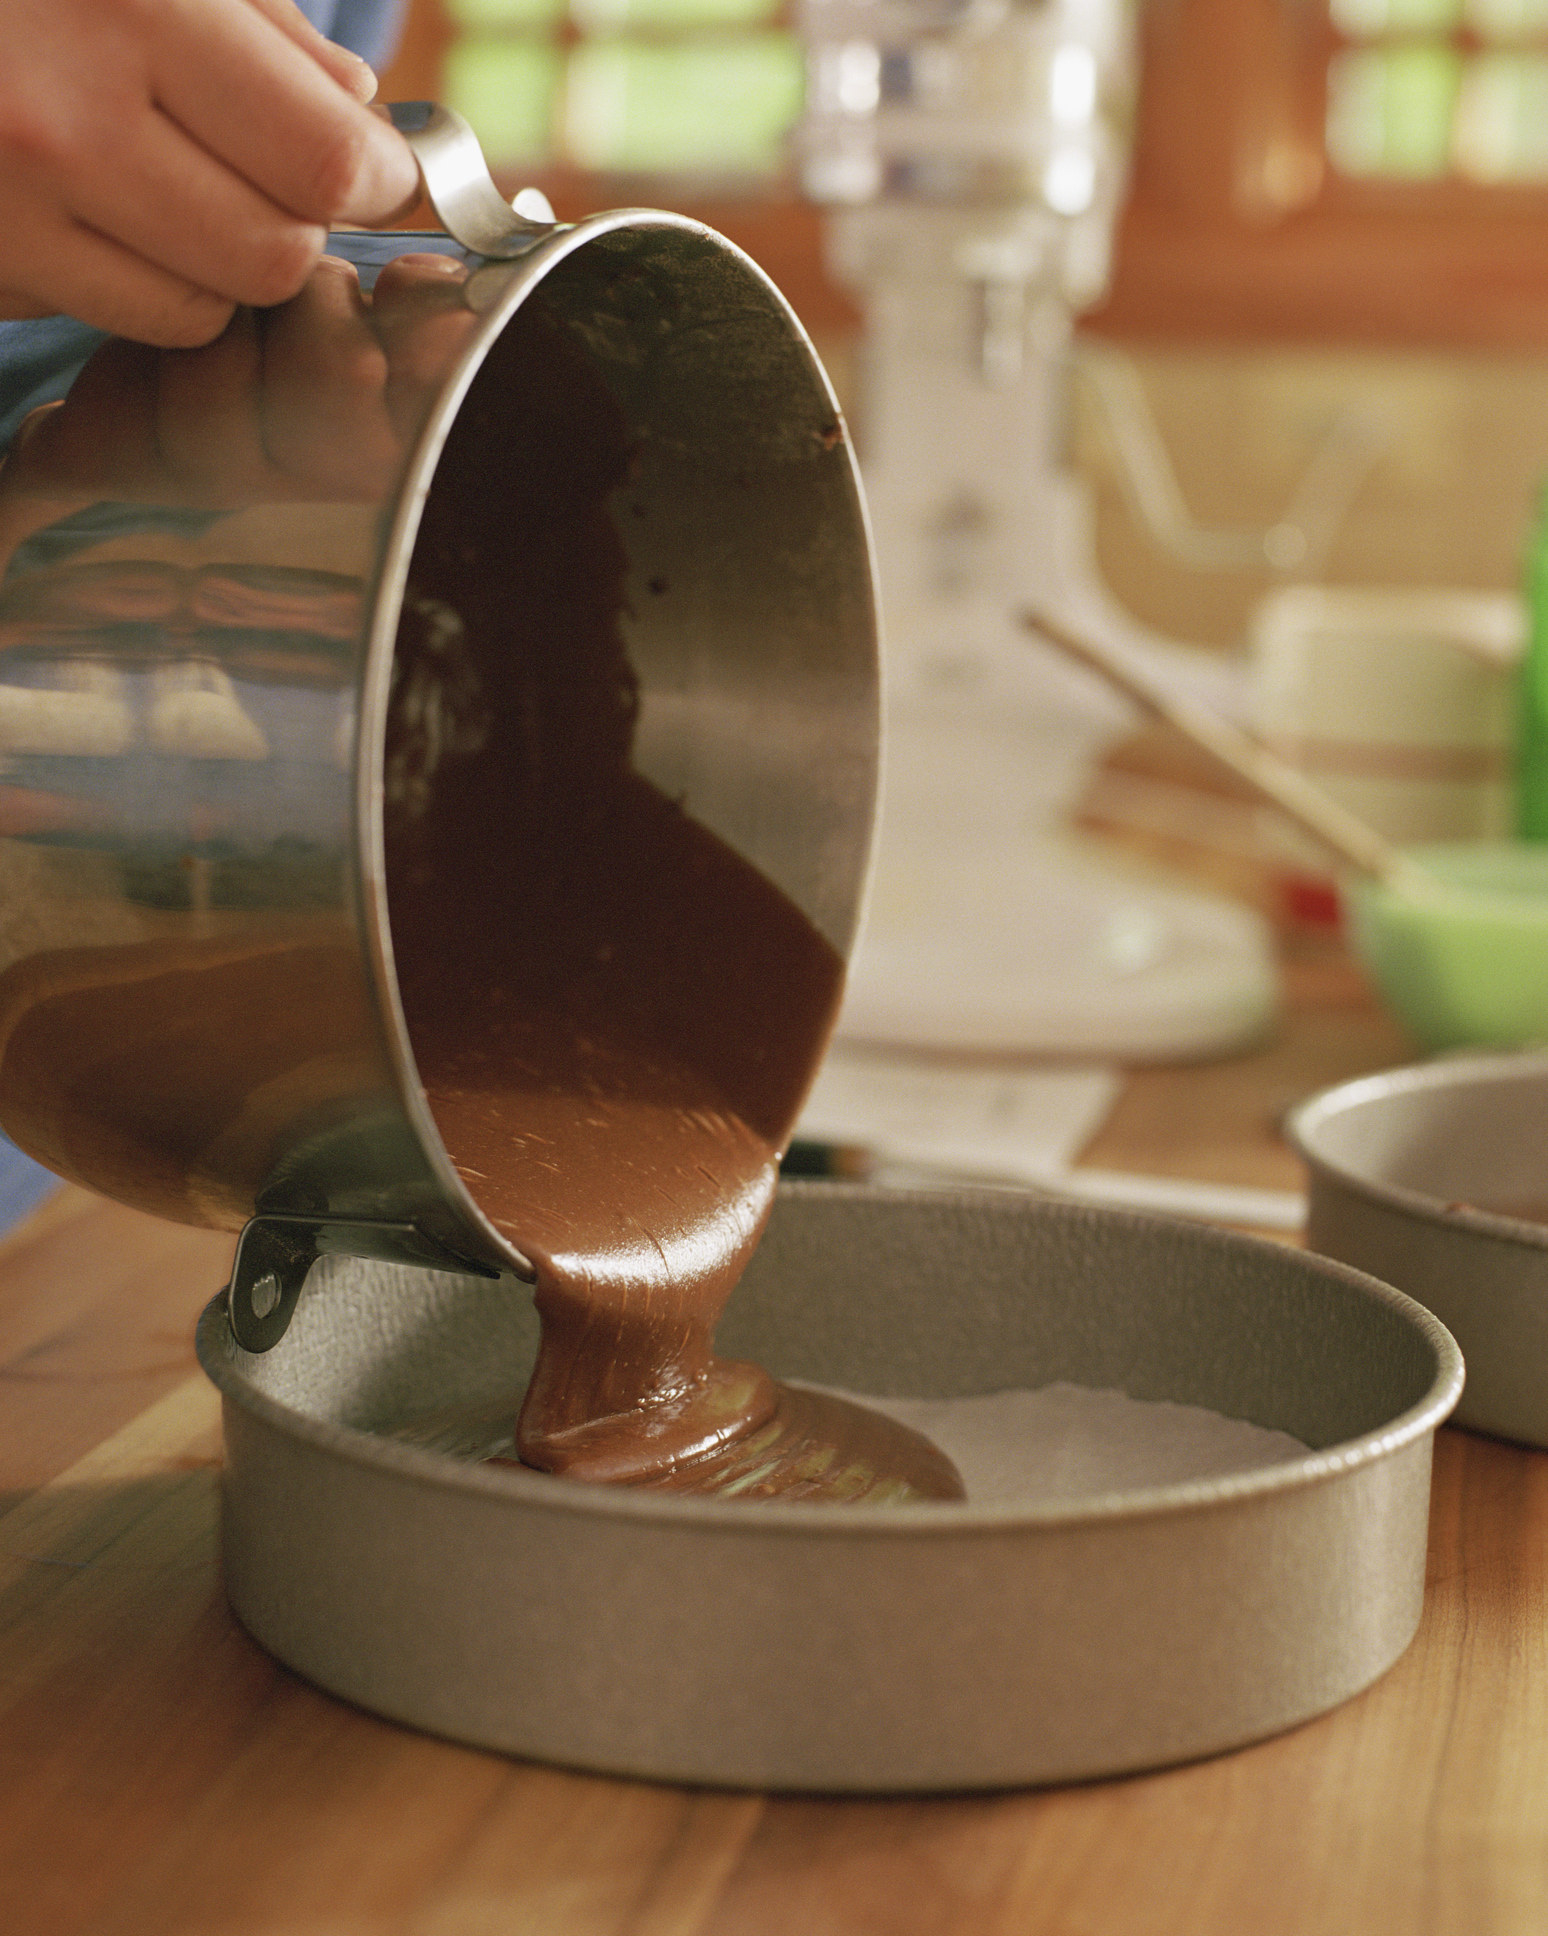 Cake batter is poured into a cake pan